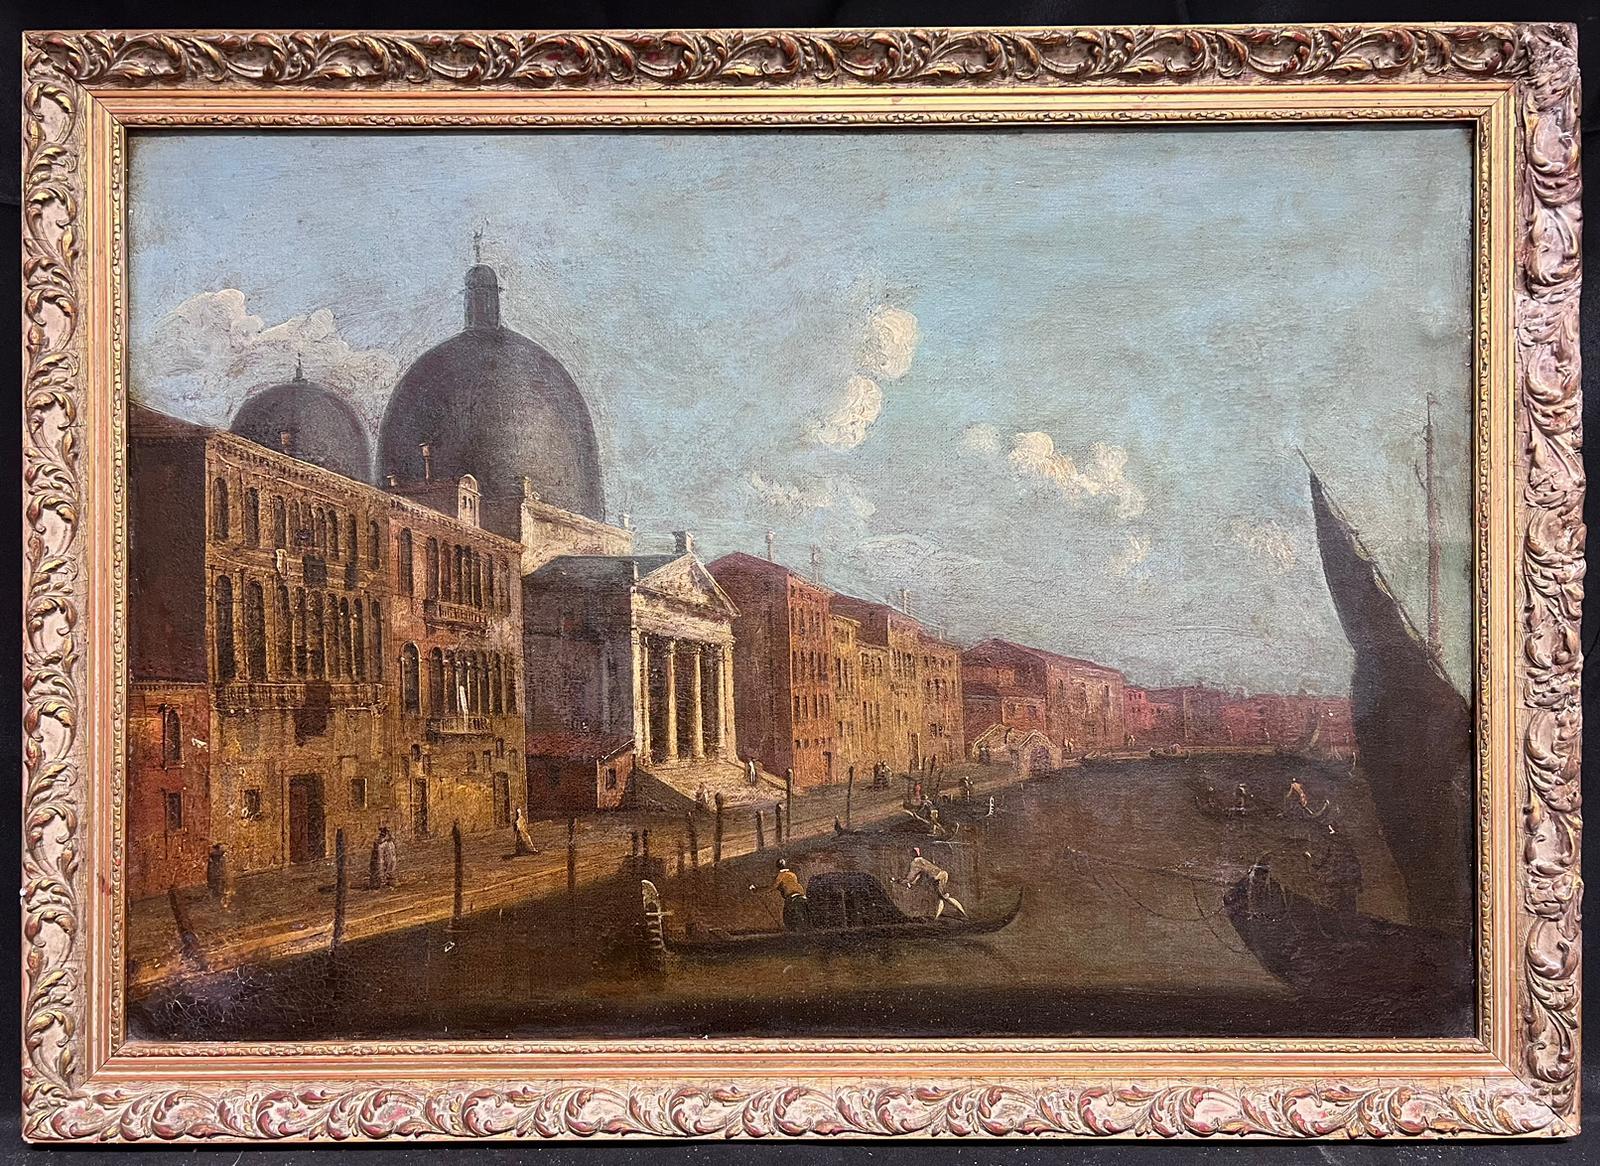 The Venetian Canal
Italian artist, 18th century
circle of Francesco Guardi (Italian 1712-1793)
oil on canvas, framed
framed: 23.5 x 32.5 inches
canvas: 20 x 29.5 inches
provenance: private collection, Europe
condition: very good and sound condition 